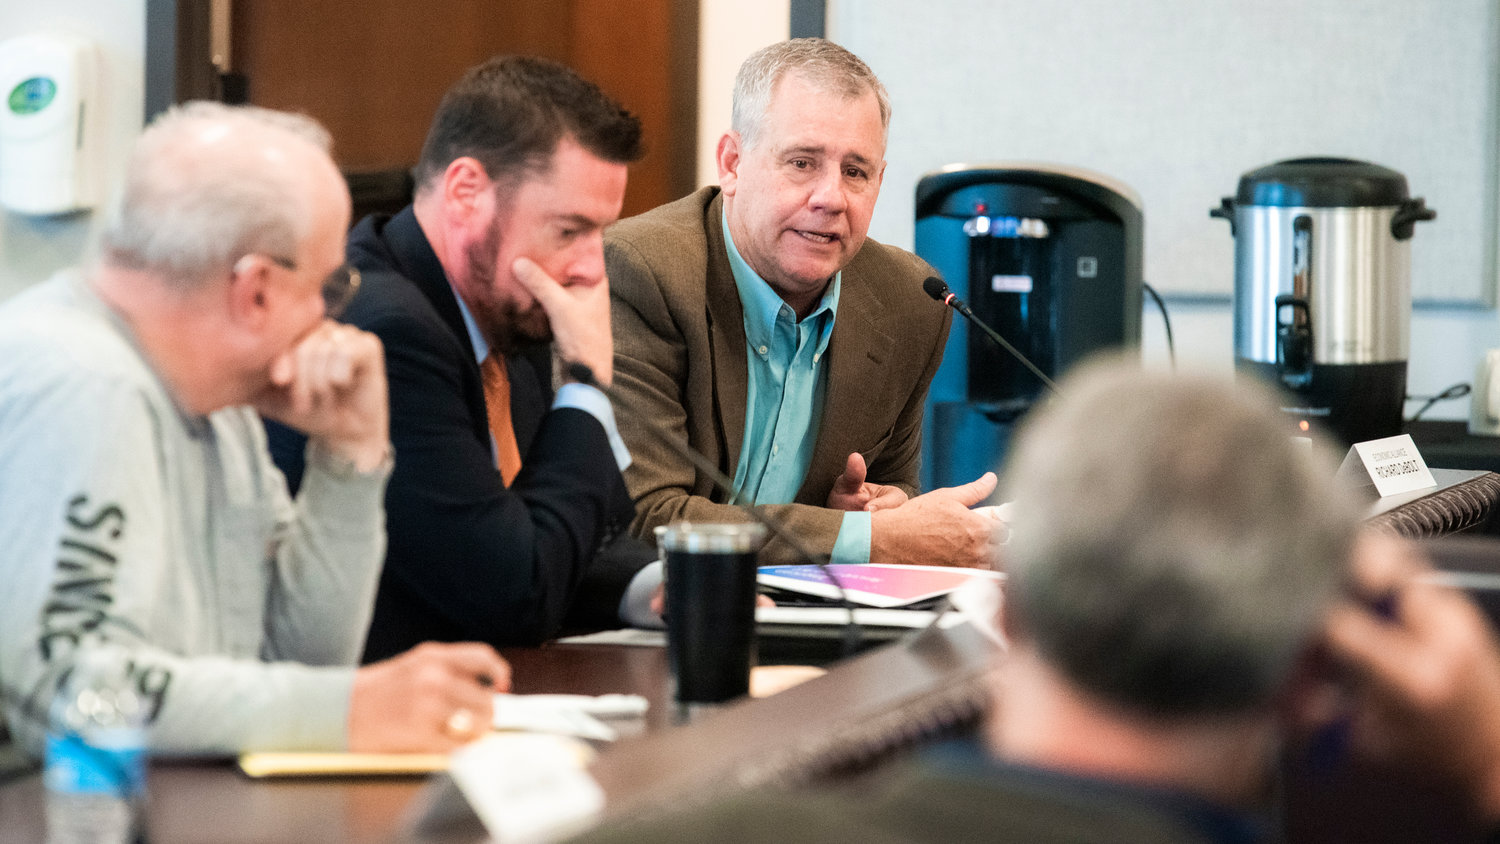 Richard DeBolt, with the Lewis County Economic Alliance, speaks during an ARPA and Infrastructure Initiatives Stakeholders Meeting in the commissioners’ hearing room at the Historical Lewis County Courthouse in Chehalis Friday morning.